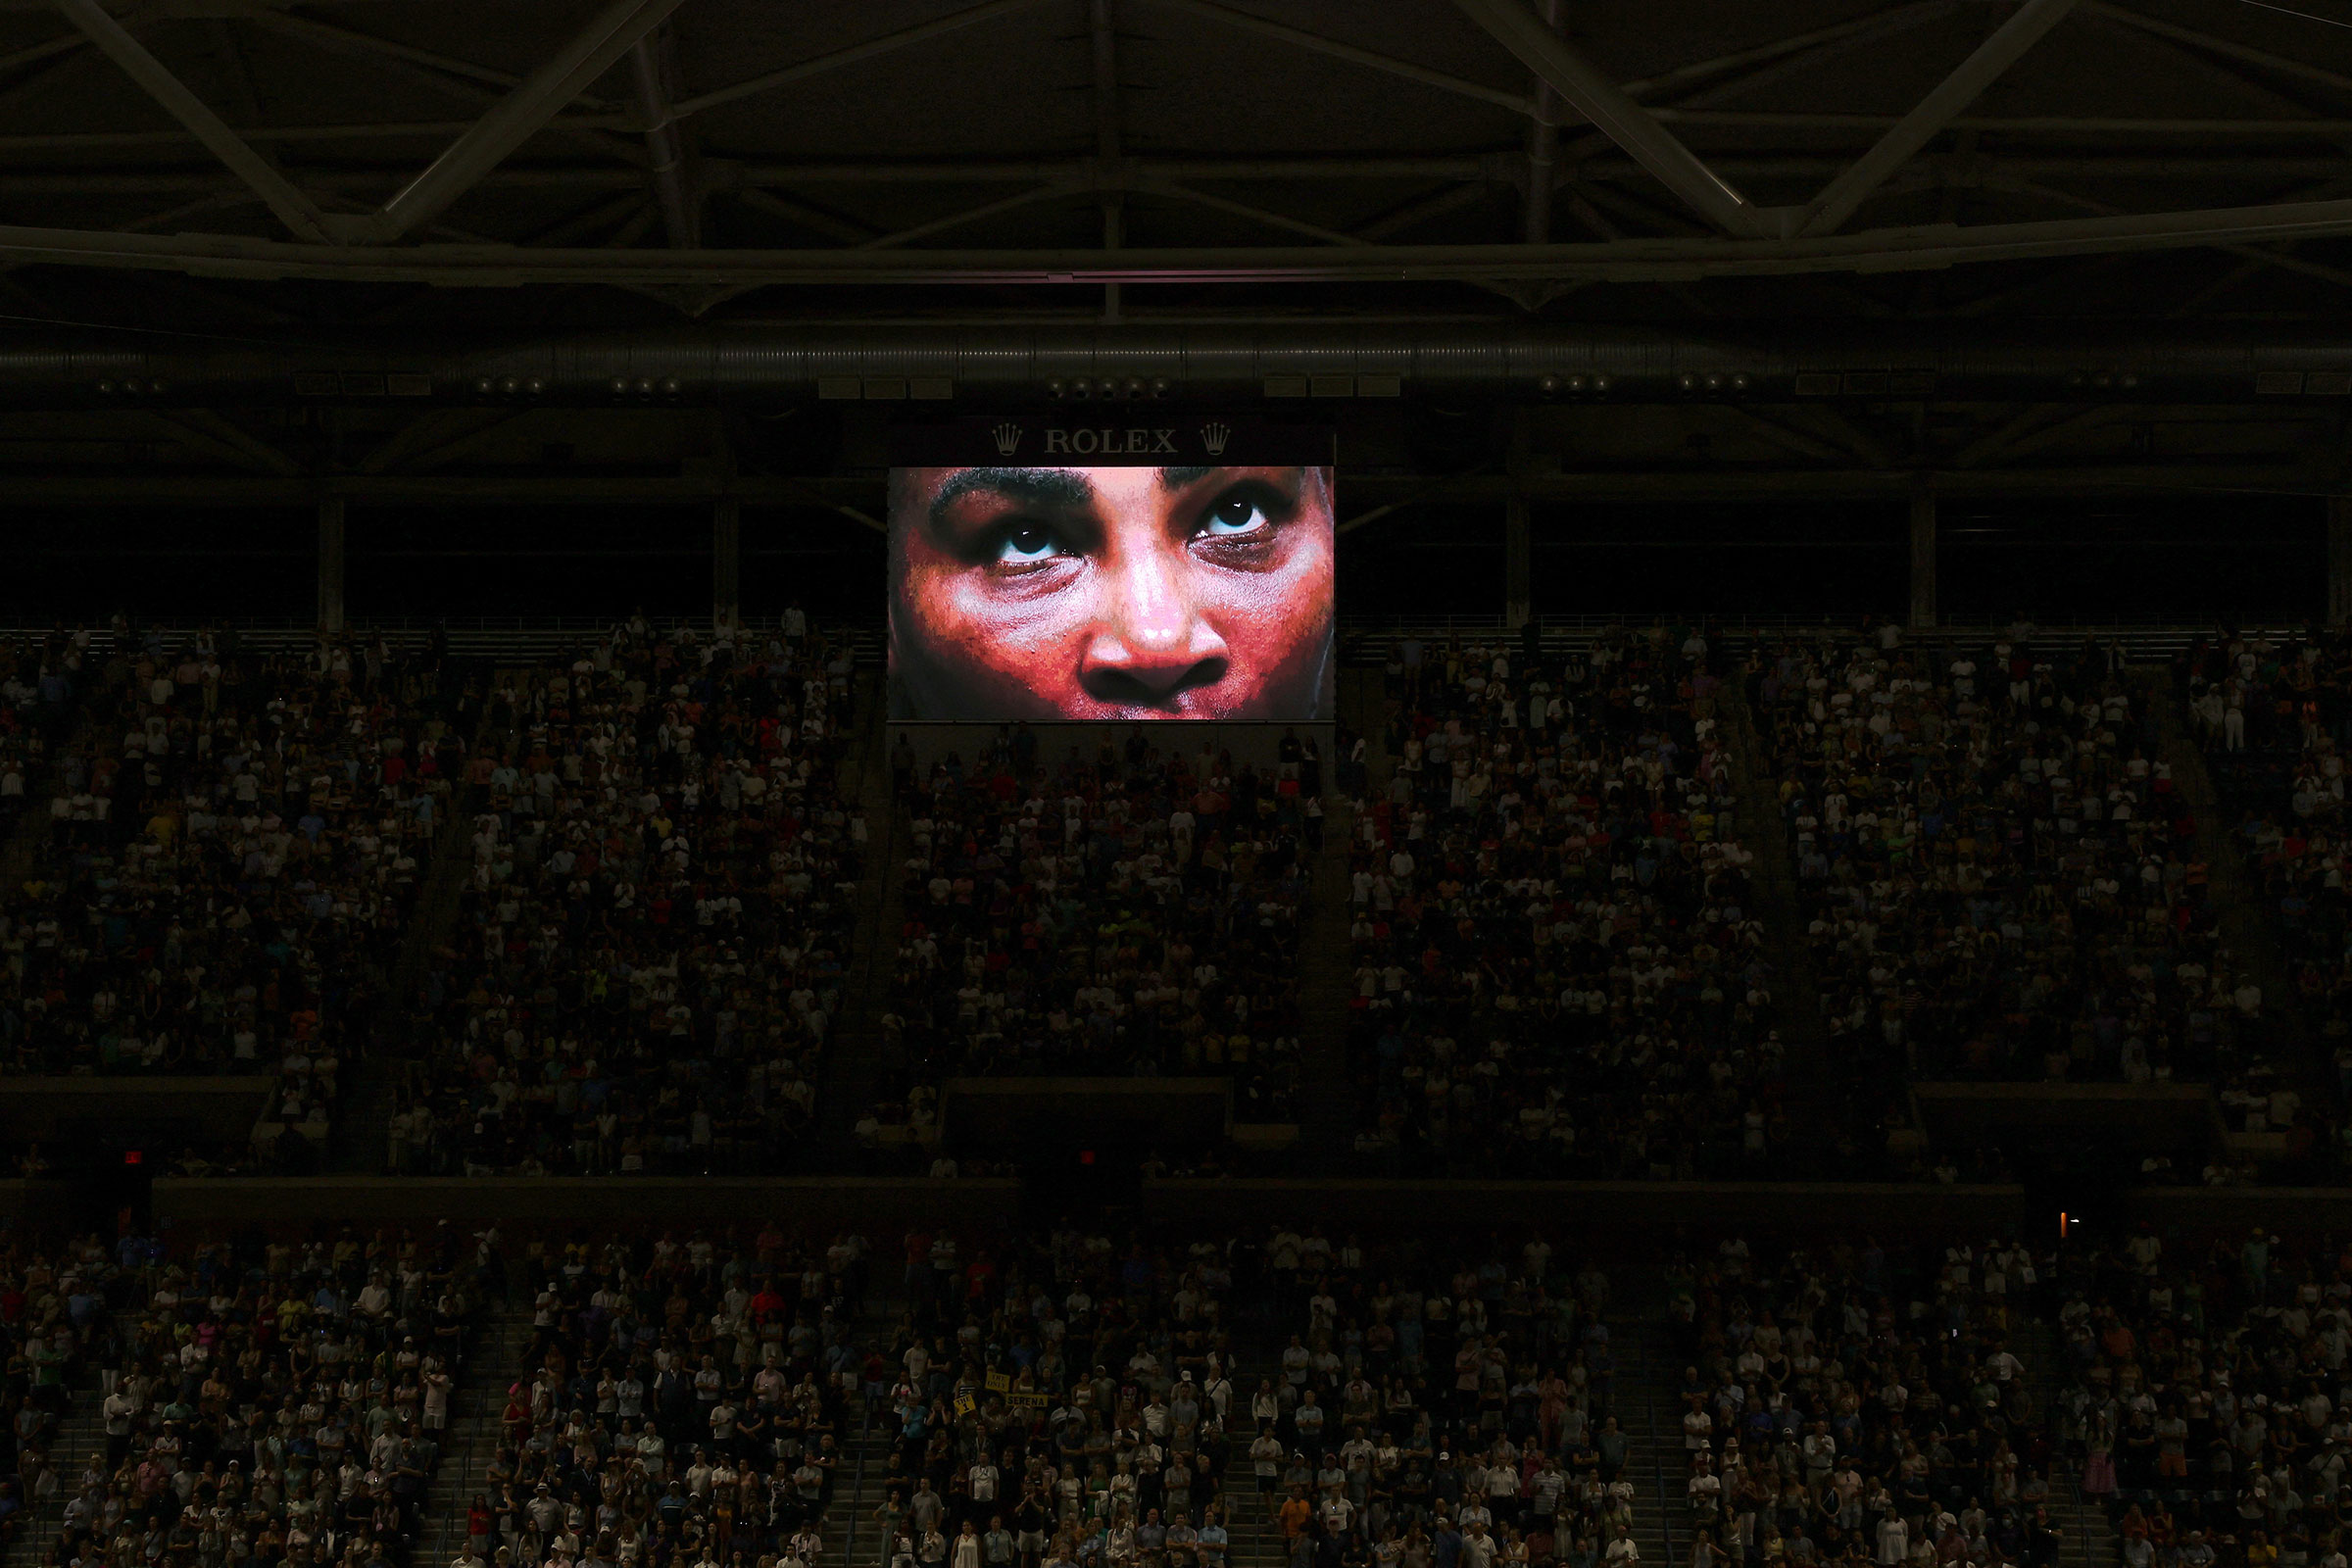 Serena Williams is seen on a video monitor tribute after winning her second round match against Estonia's Anett Kontaveit at the U.S. Open in New York on Aug. 31. (Shannon Stapleton—Reuters)